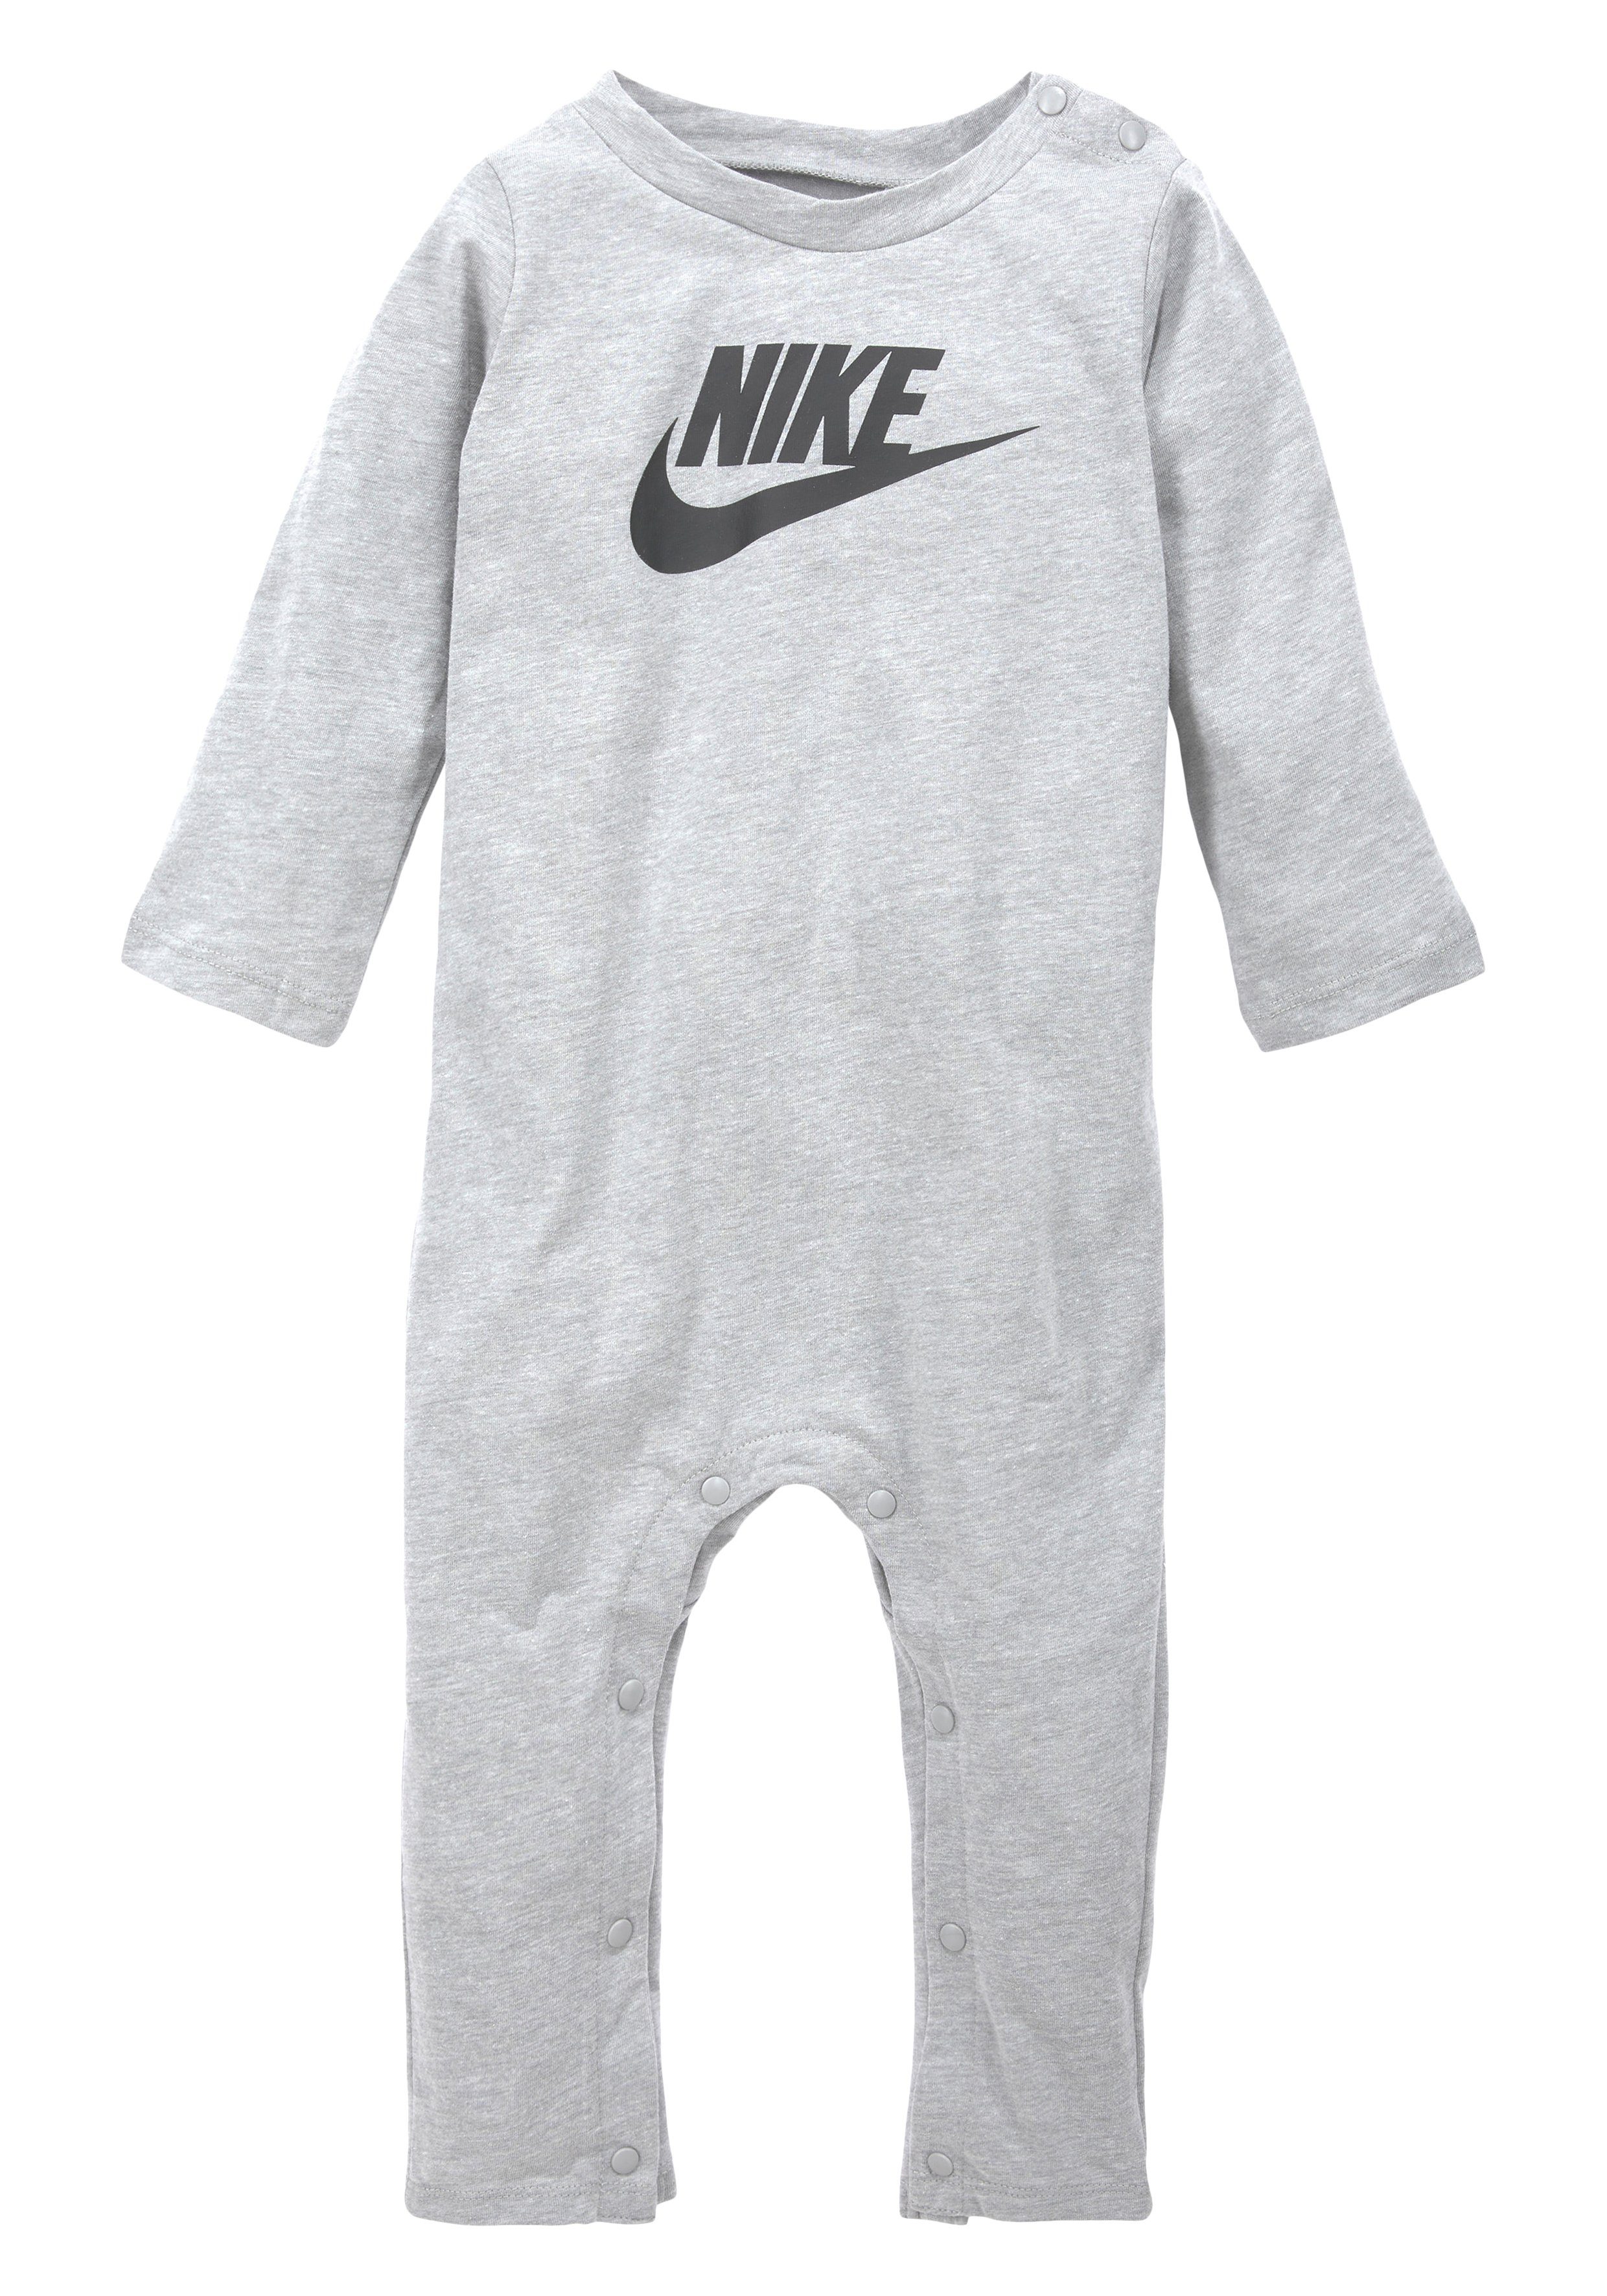 NON-FOOTED Strampler dk-grey-heat Sportswear HBR COVERALL Nike